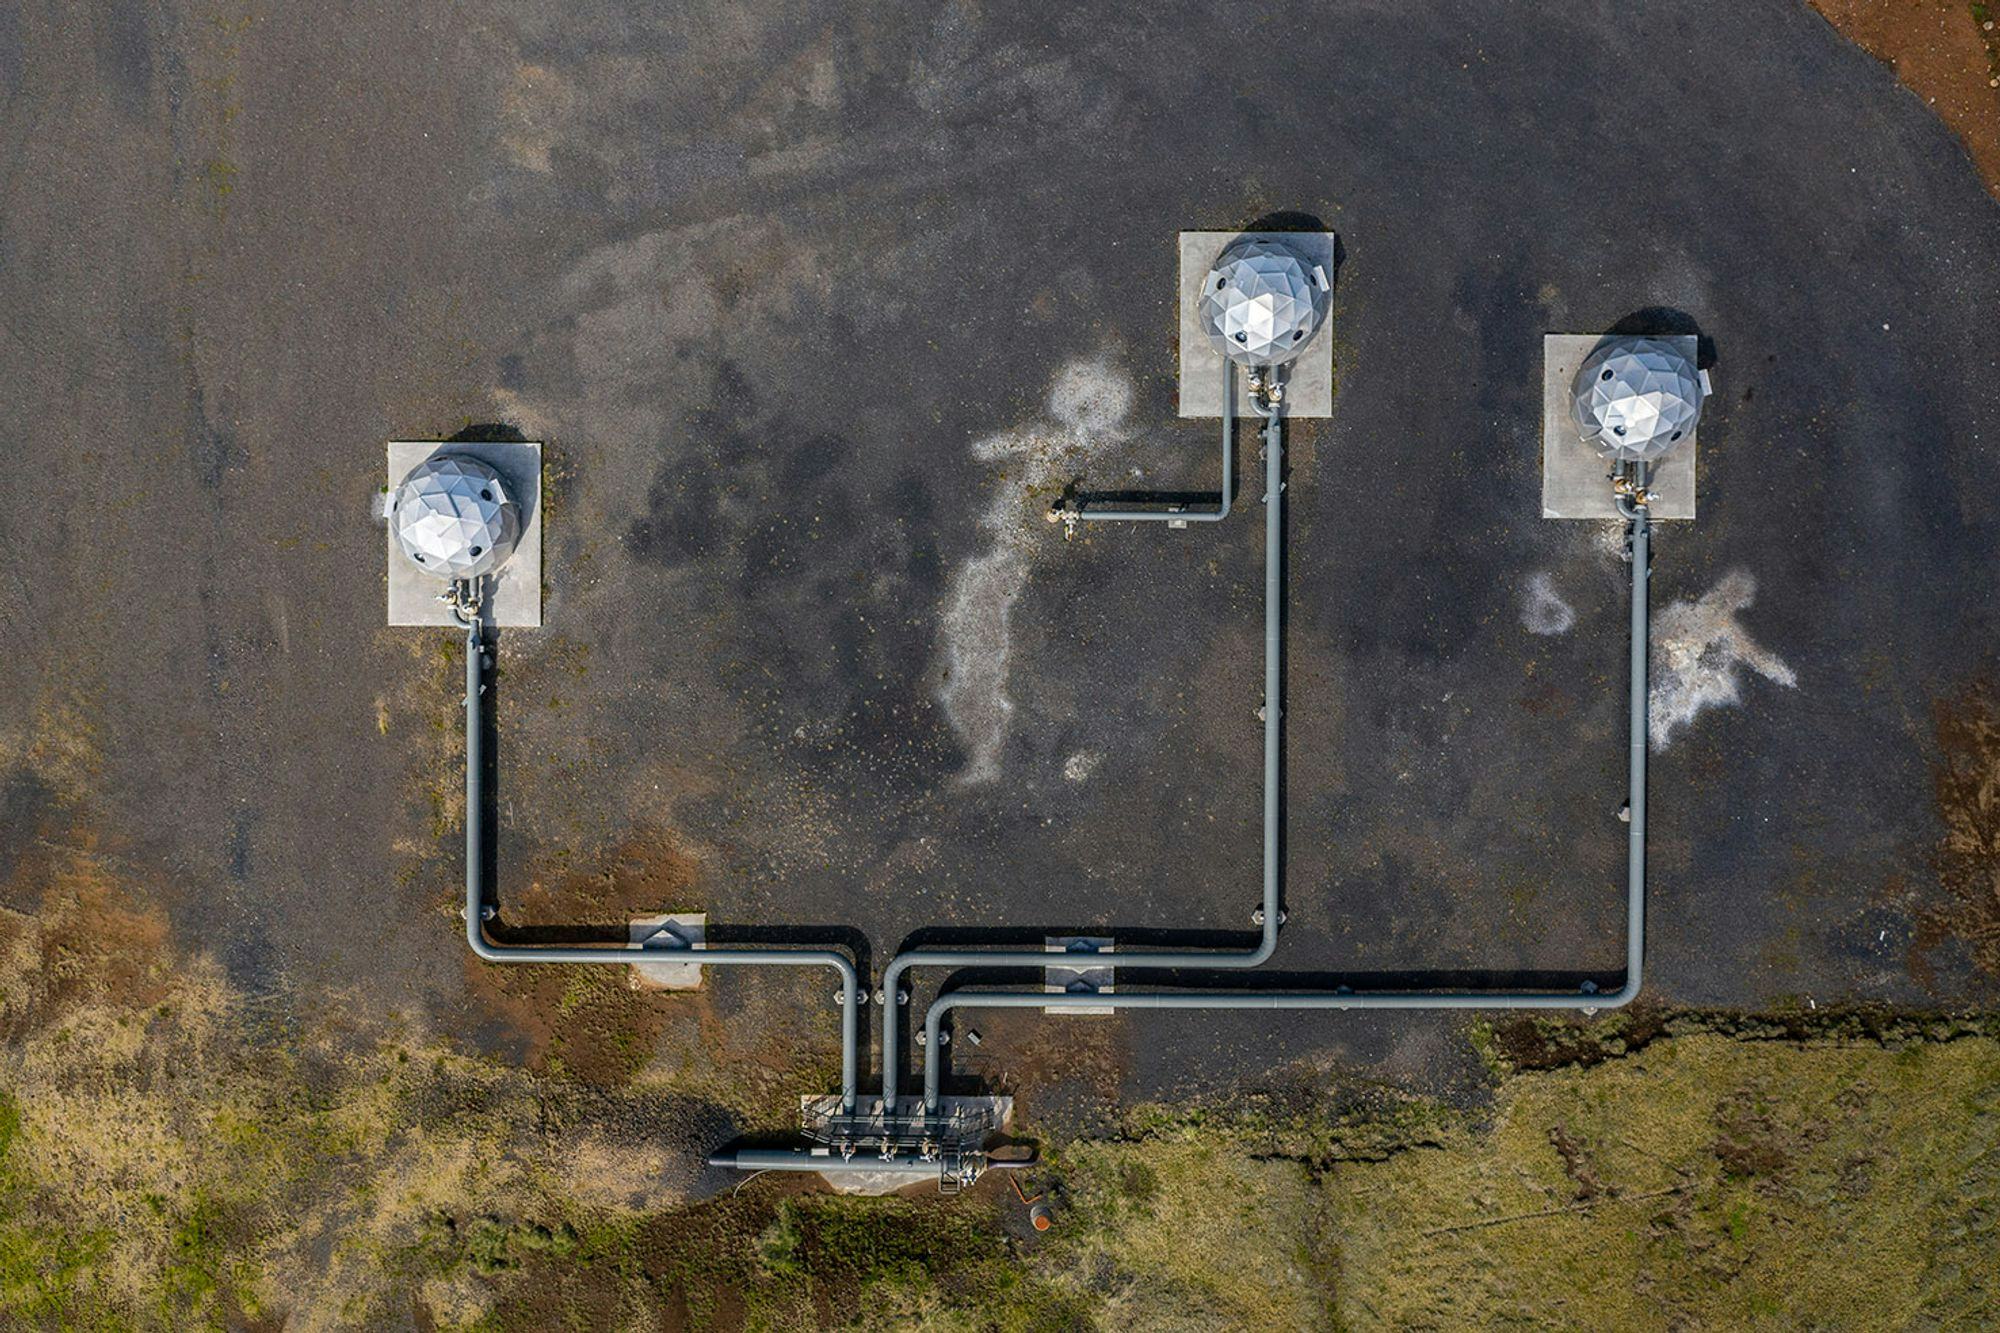 Aerial view of some kind of industrial plant, three buildings that are globes connected by pipes, on gravel, moss around the gravel